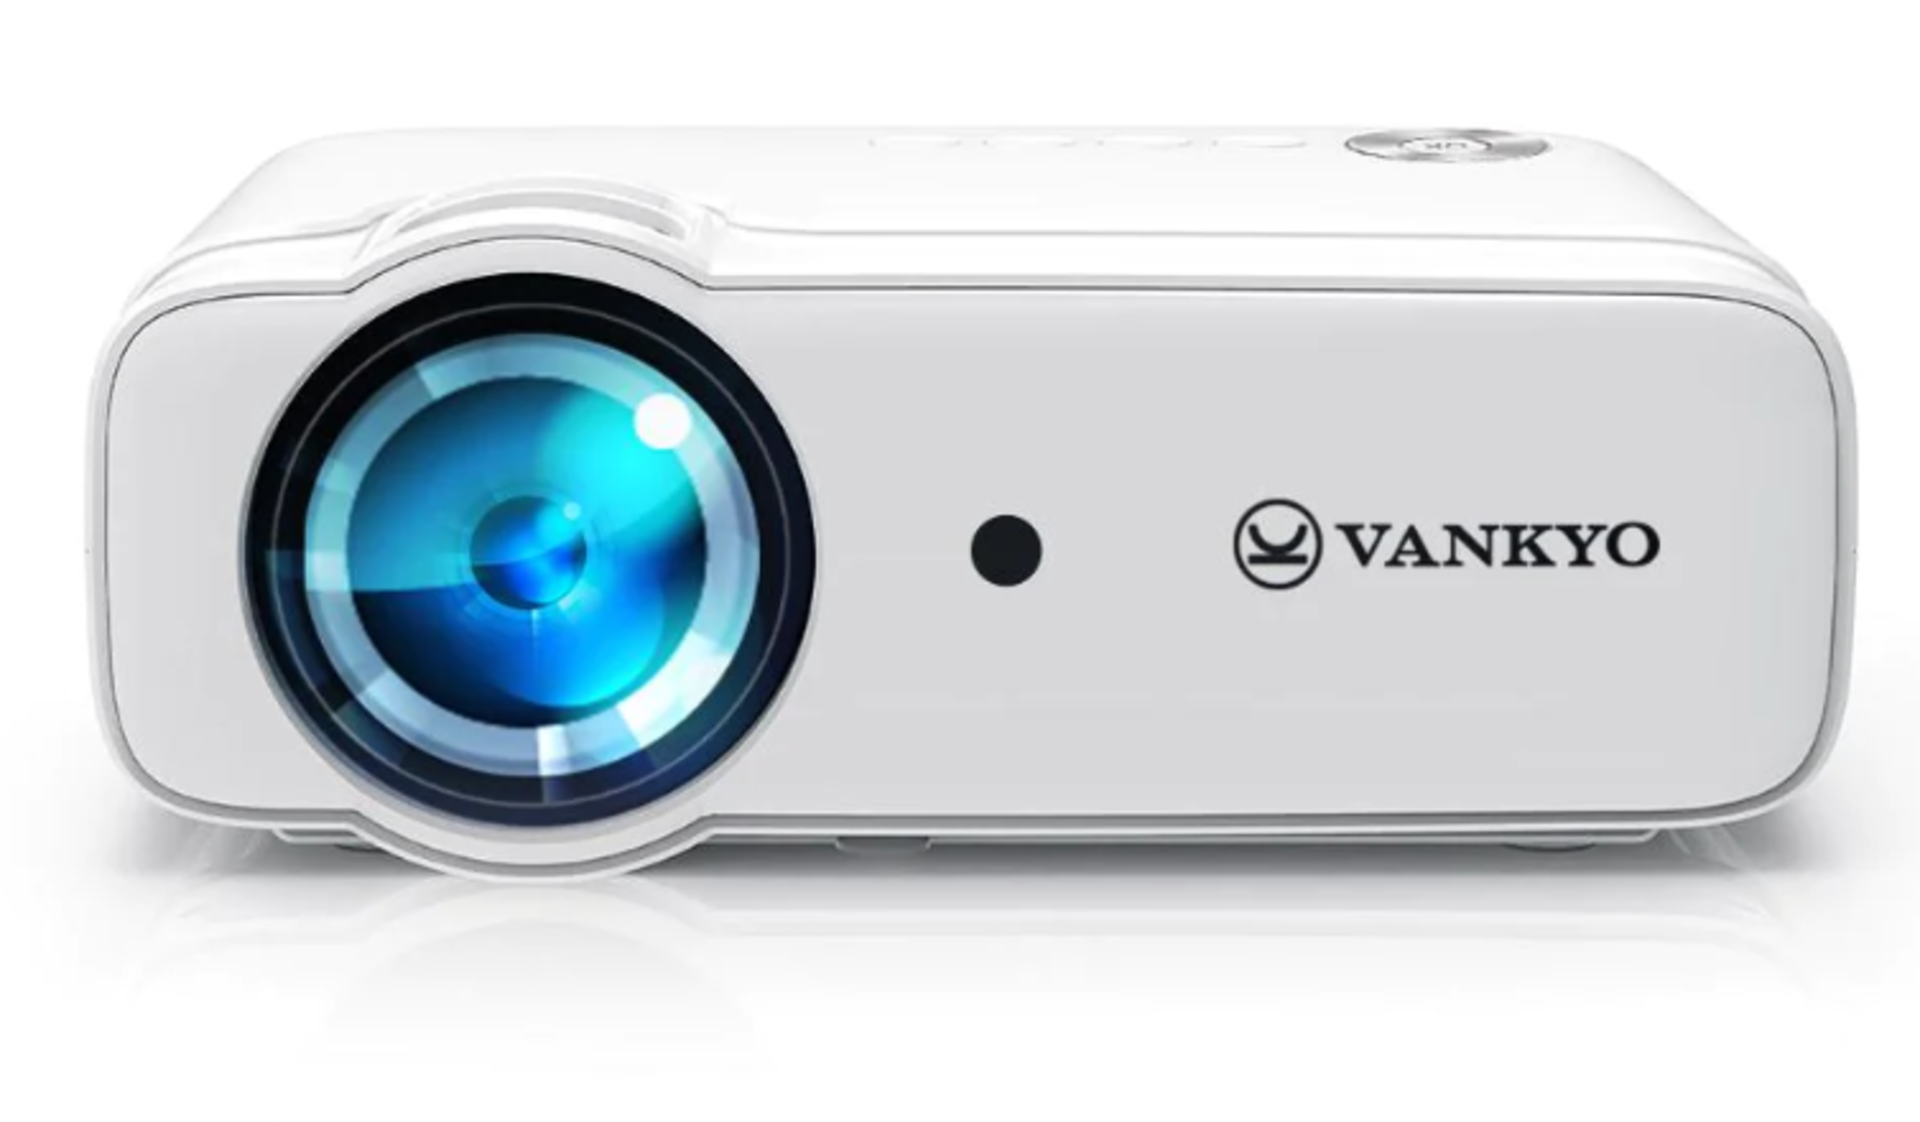 5 x New Boxed VANKYO Leisure 430 Mini Projector for Movie, Outdoor Entertainment, Native 720P. - Image 2 of 3